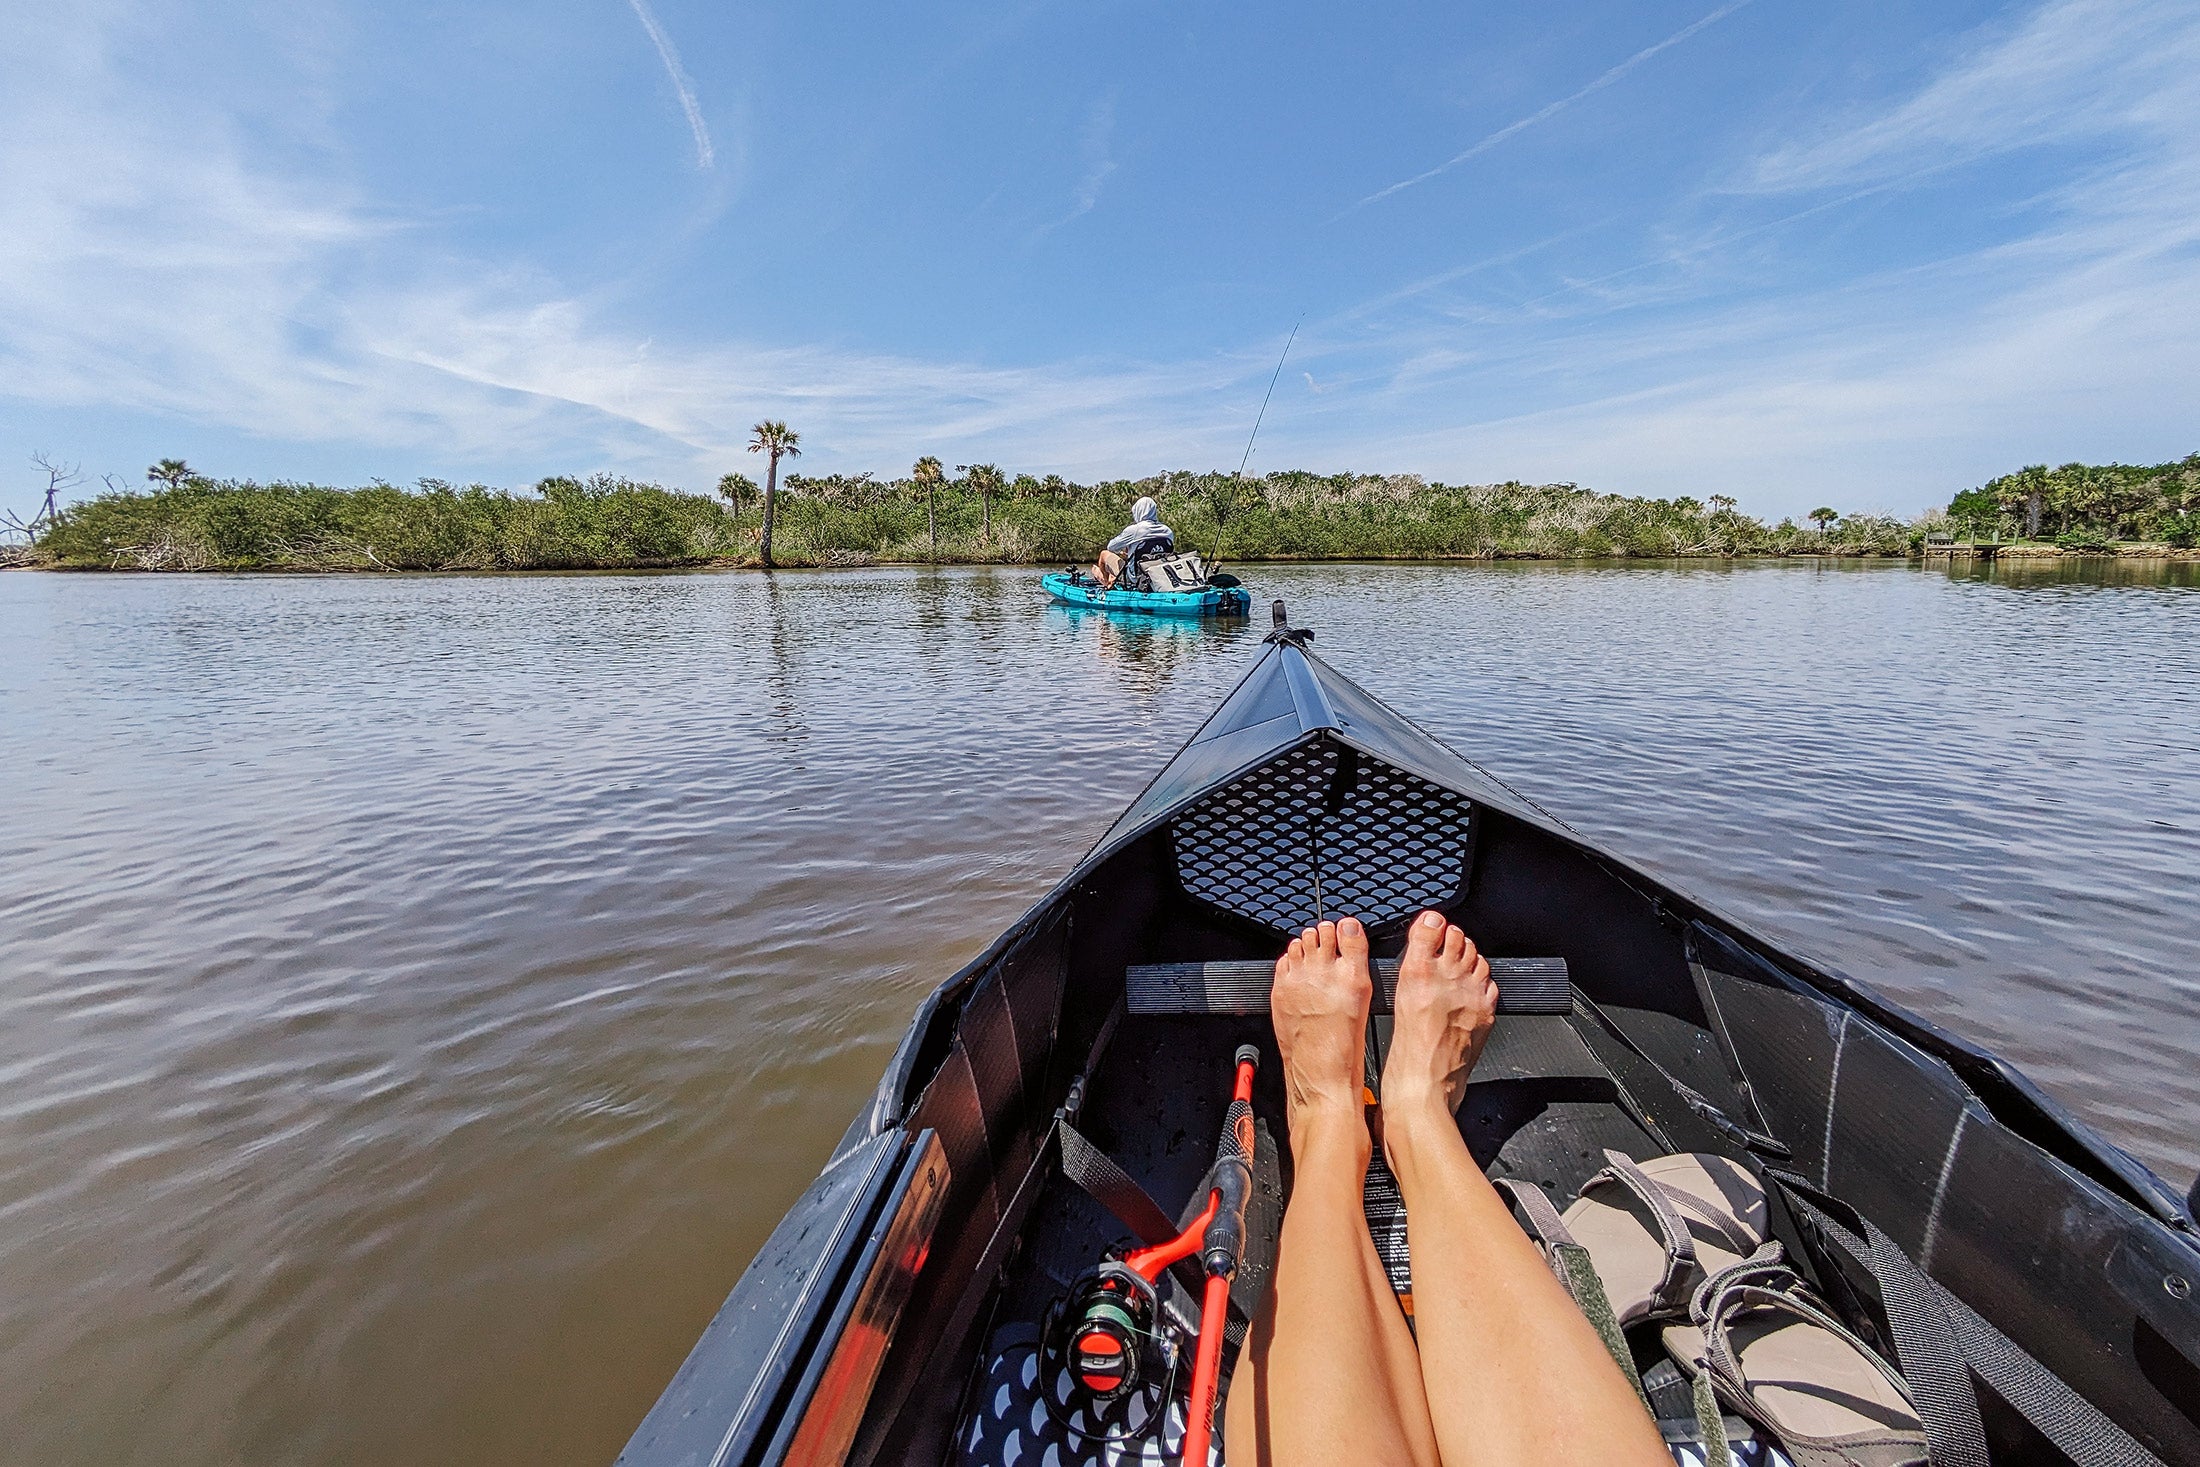 Legs stretched out in the Oru Kayak with another kayak in front on a river.